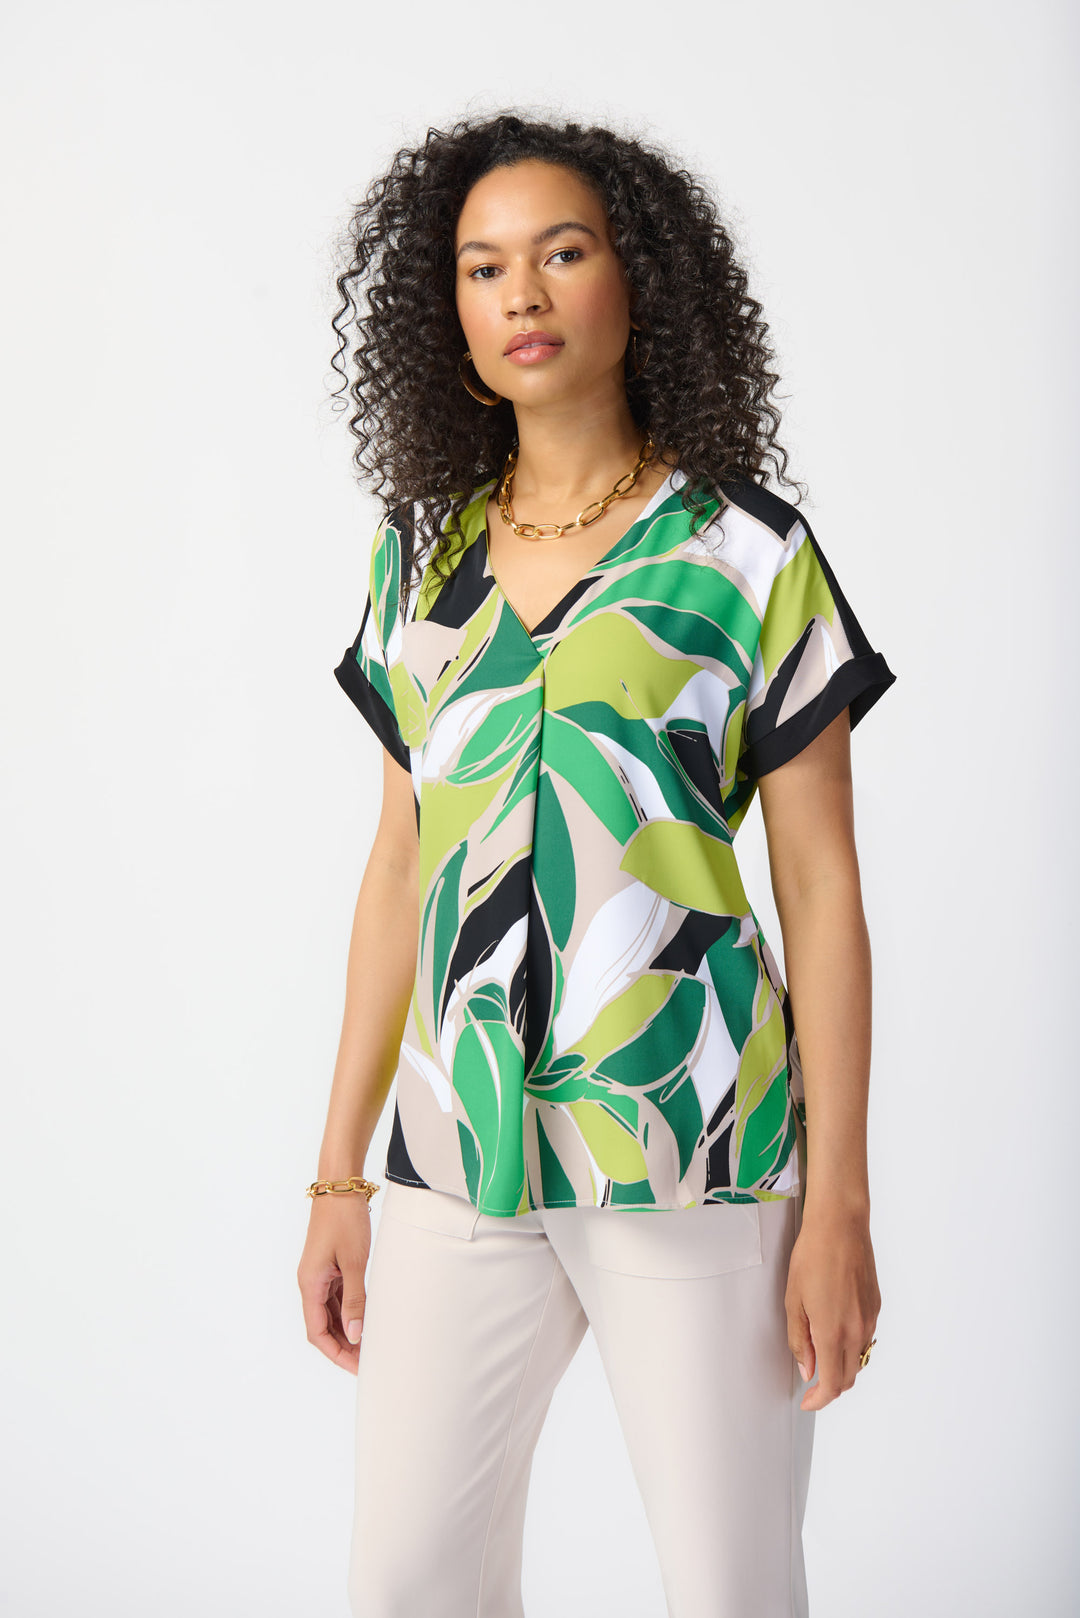 The lovely centre pleat adds a touch of elegance while the contrasting short sleeves give it a modern twist.